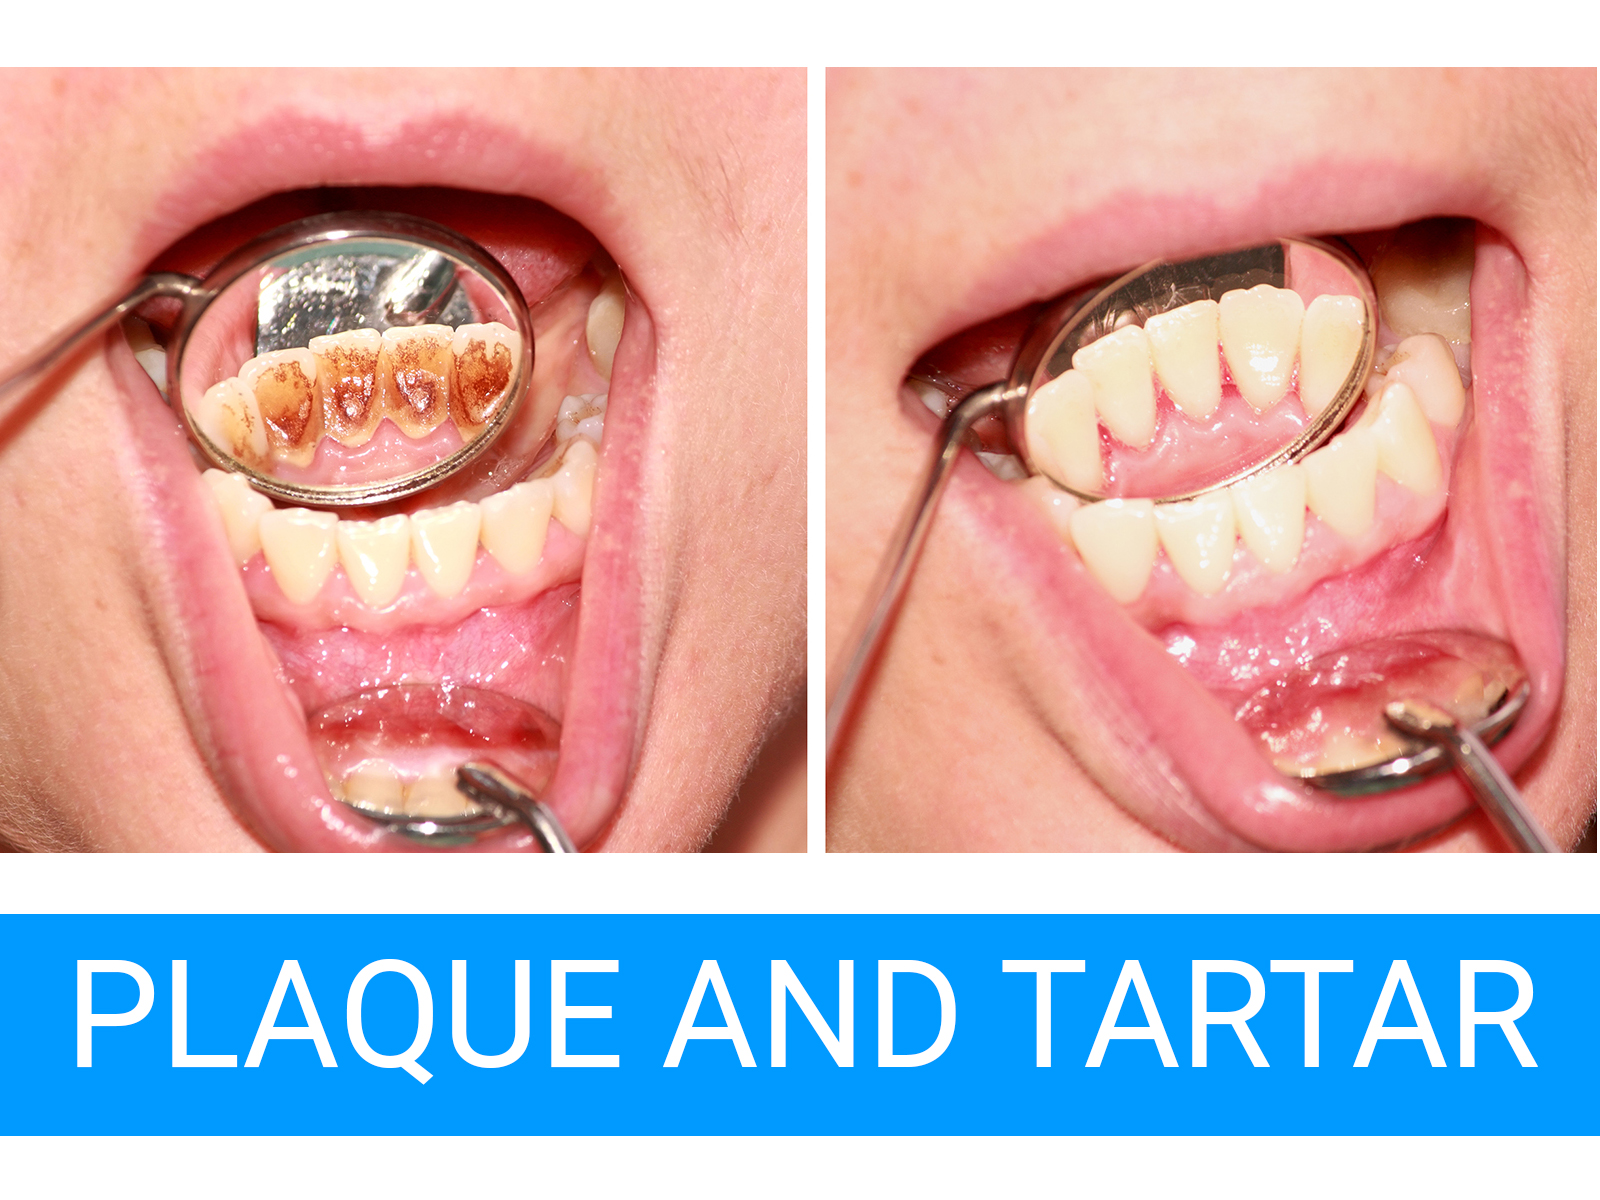 What is the difference between plaque and tartar?